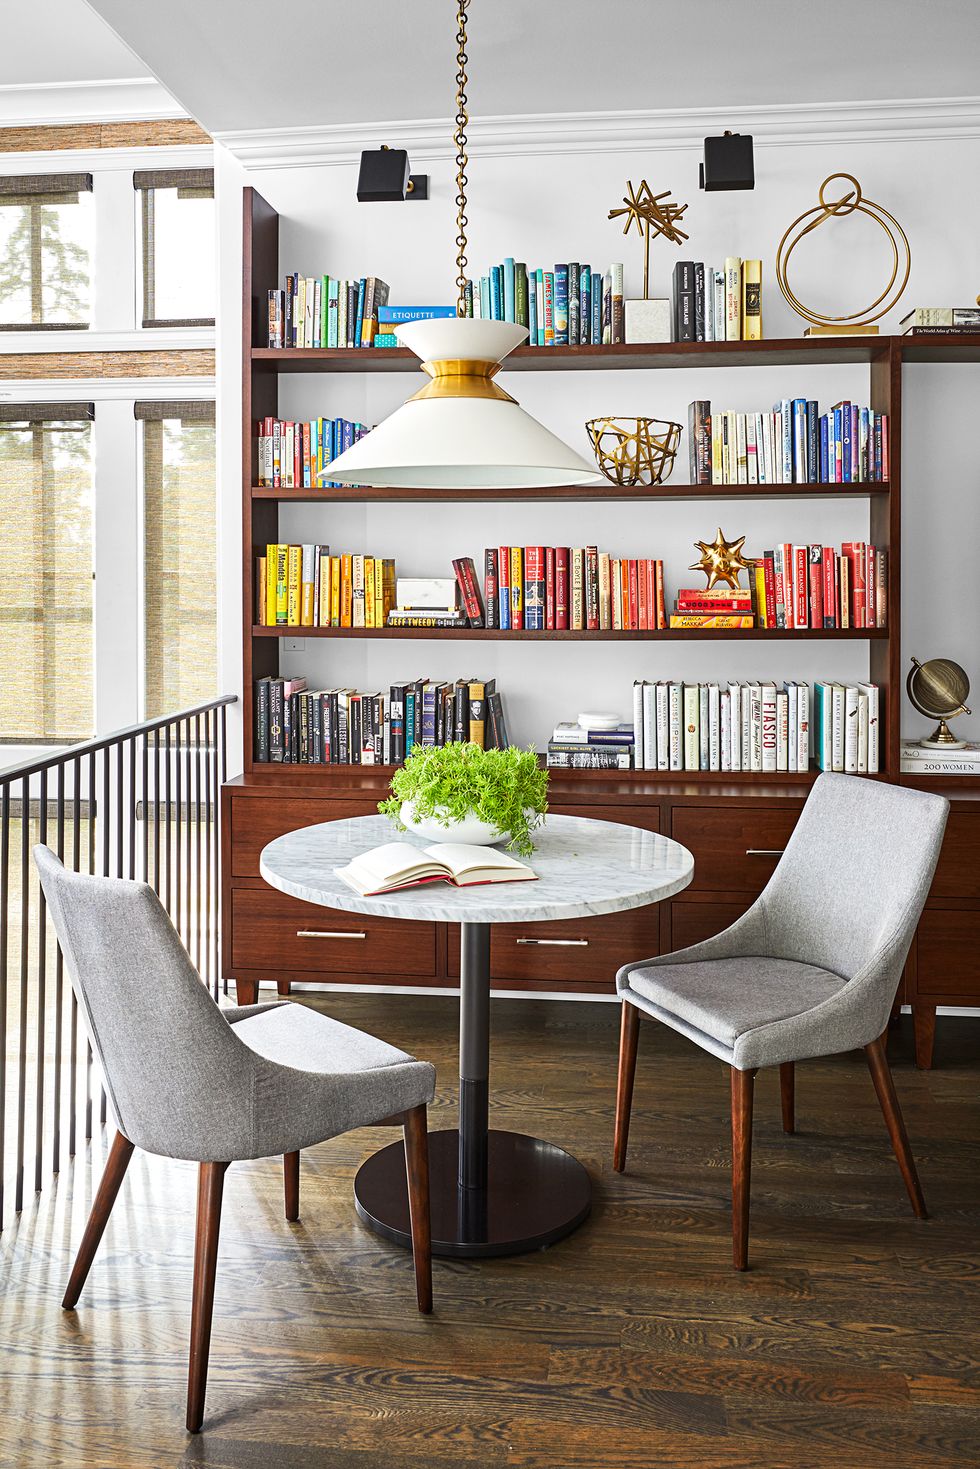 Home work: 7 study desk ideas for a stylish and functional s